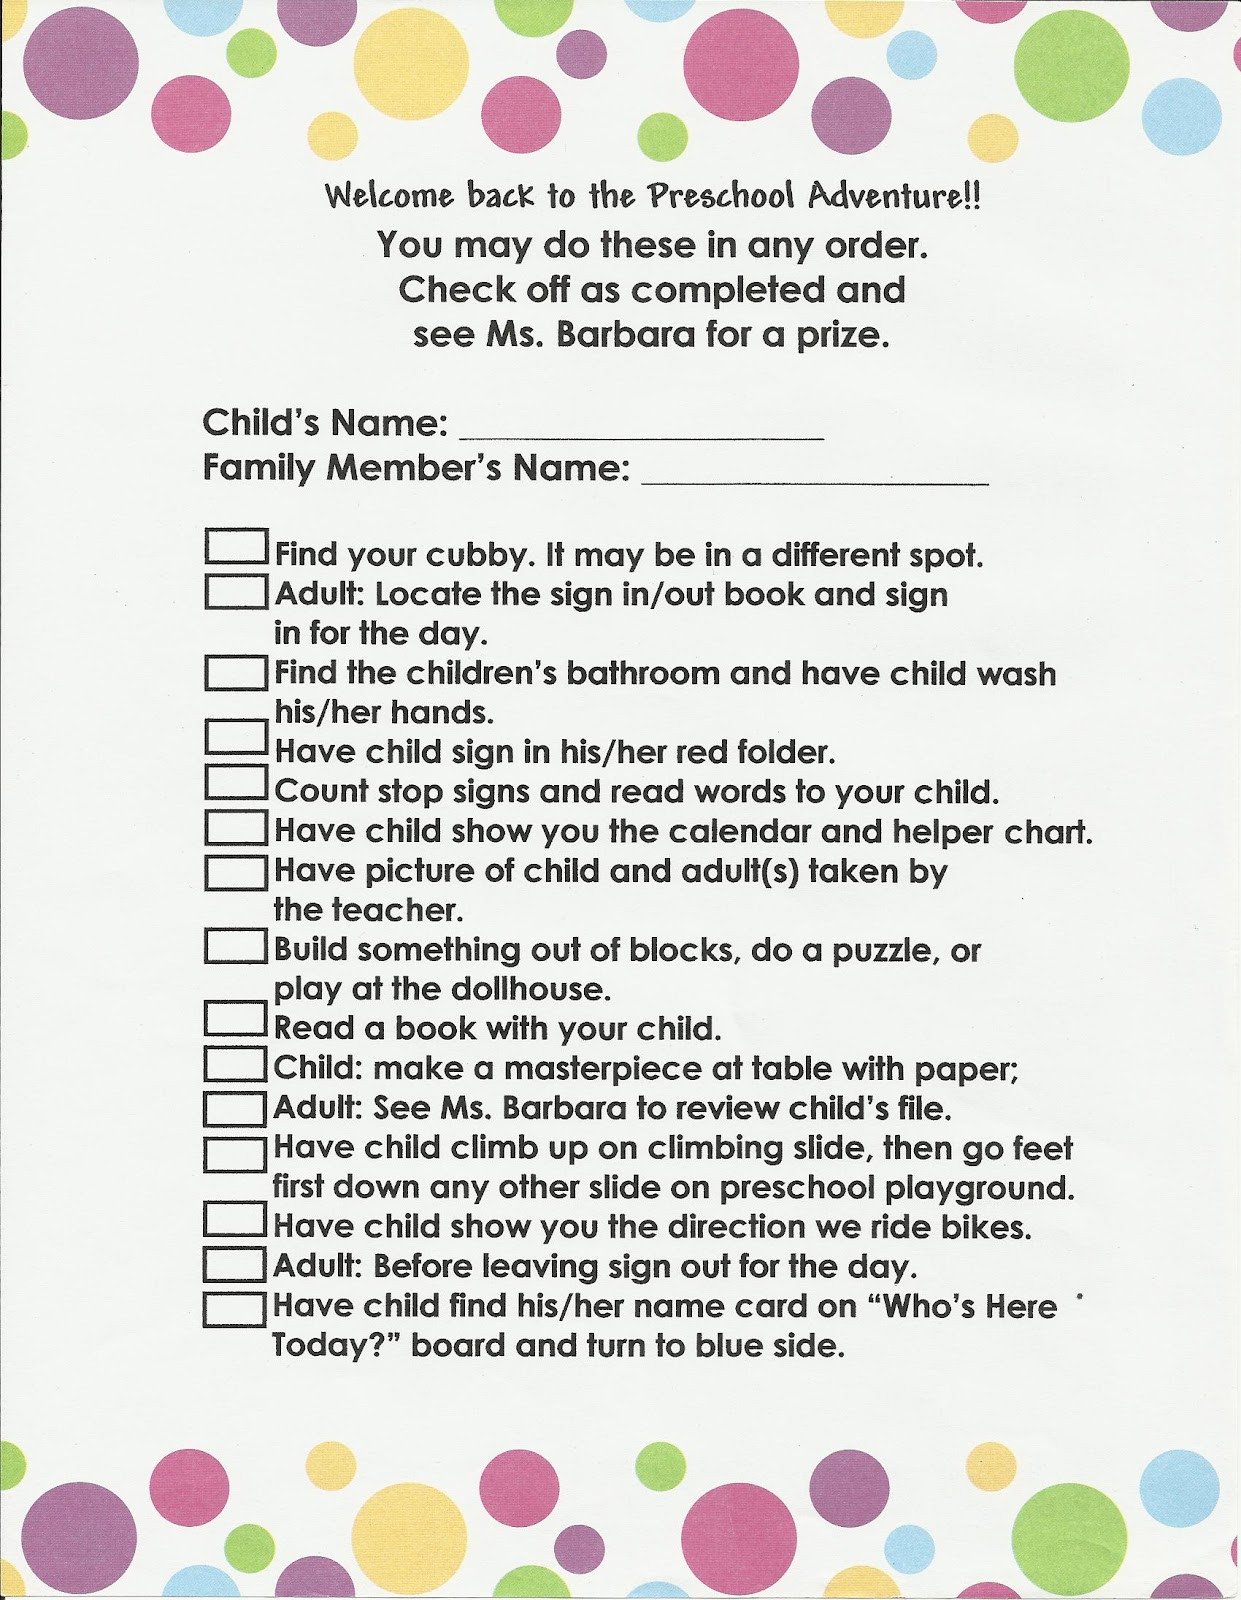 Preschool Welcome Letter Template for the Children Preschool Time Wel Ing Parents and